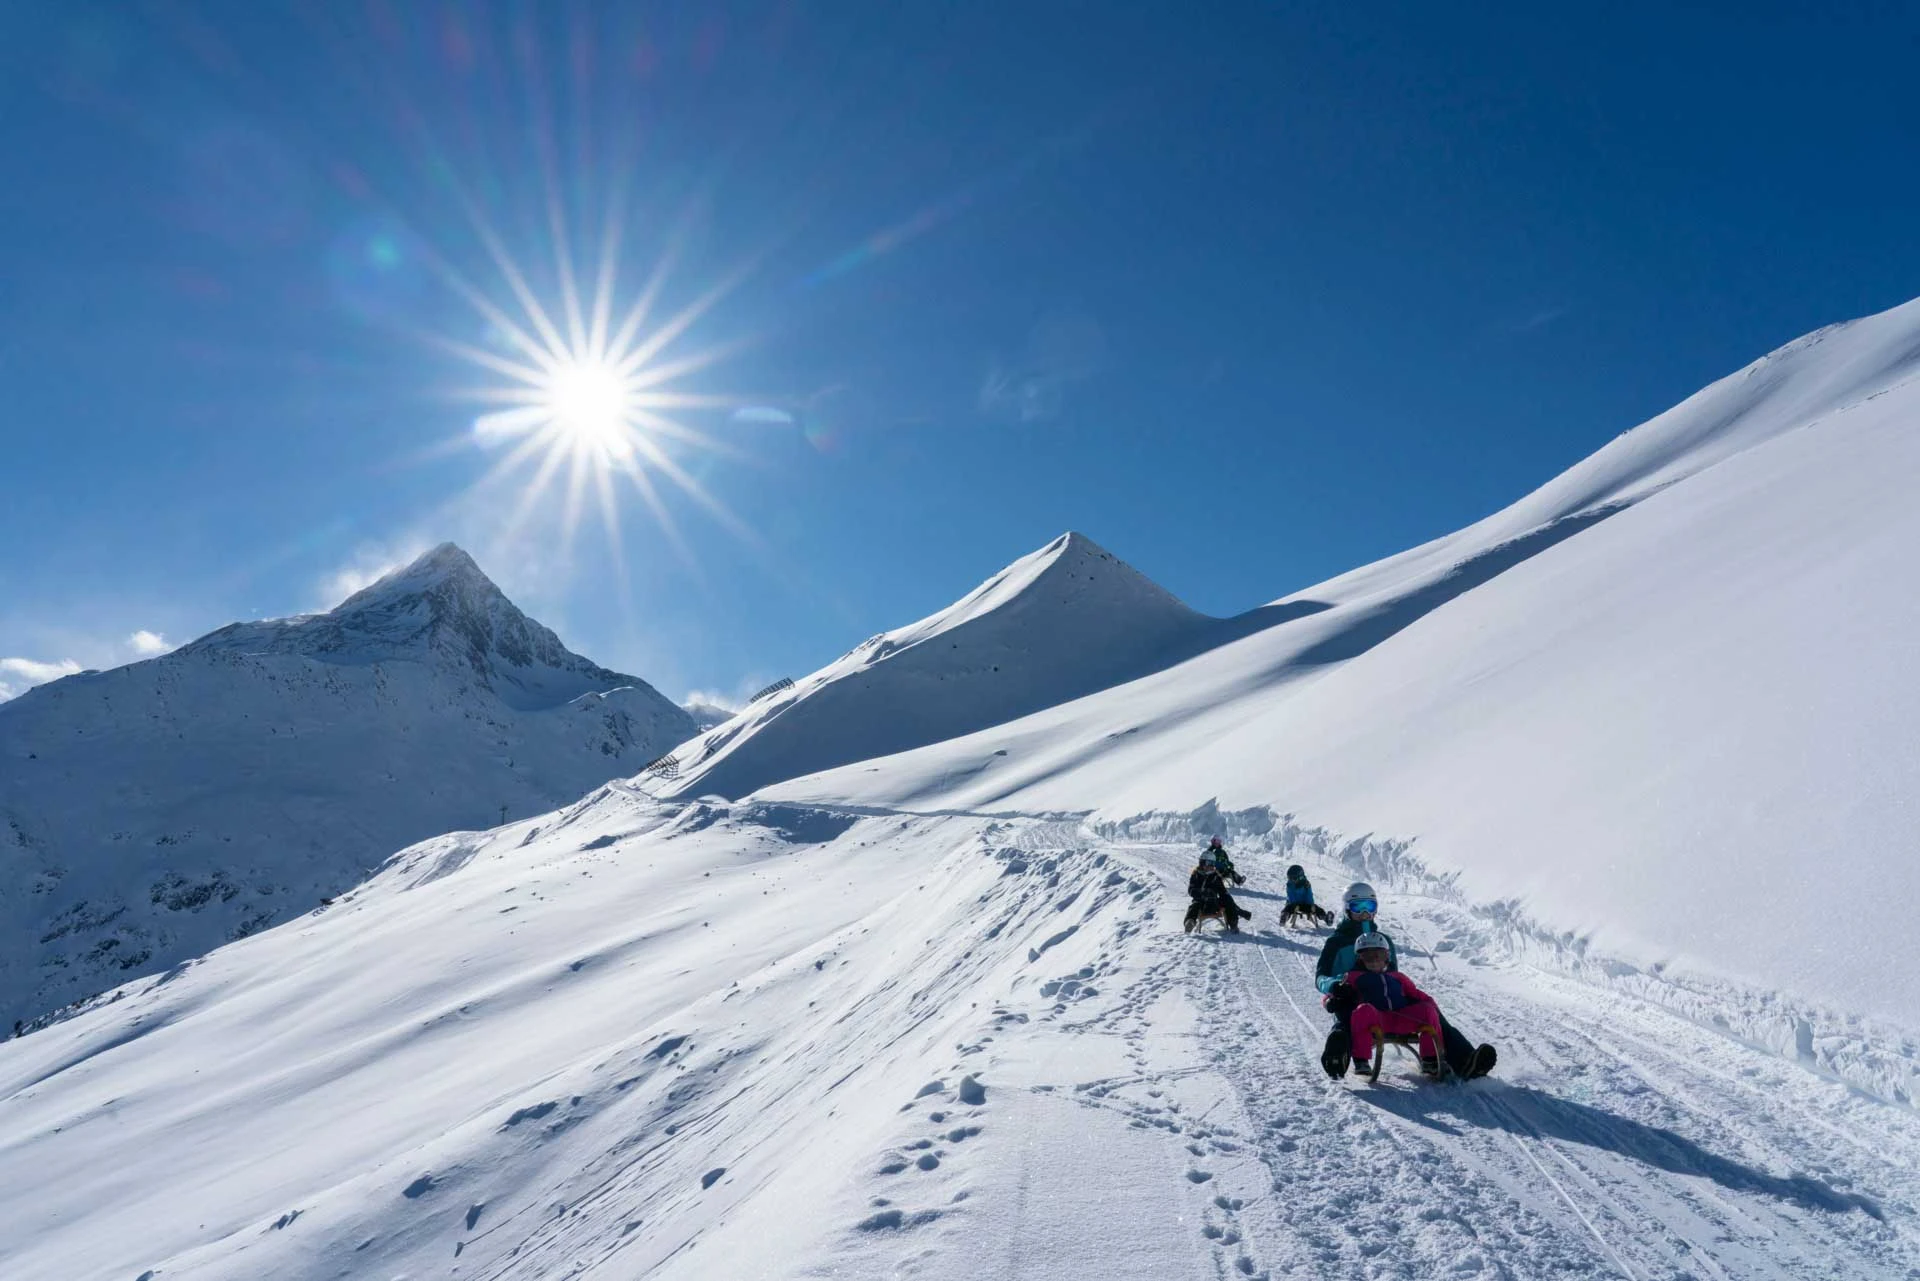 a family of sledders on a cat track under the sun